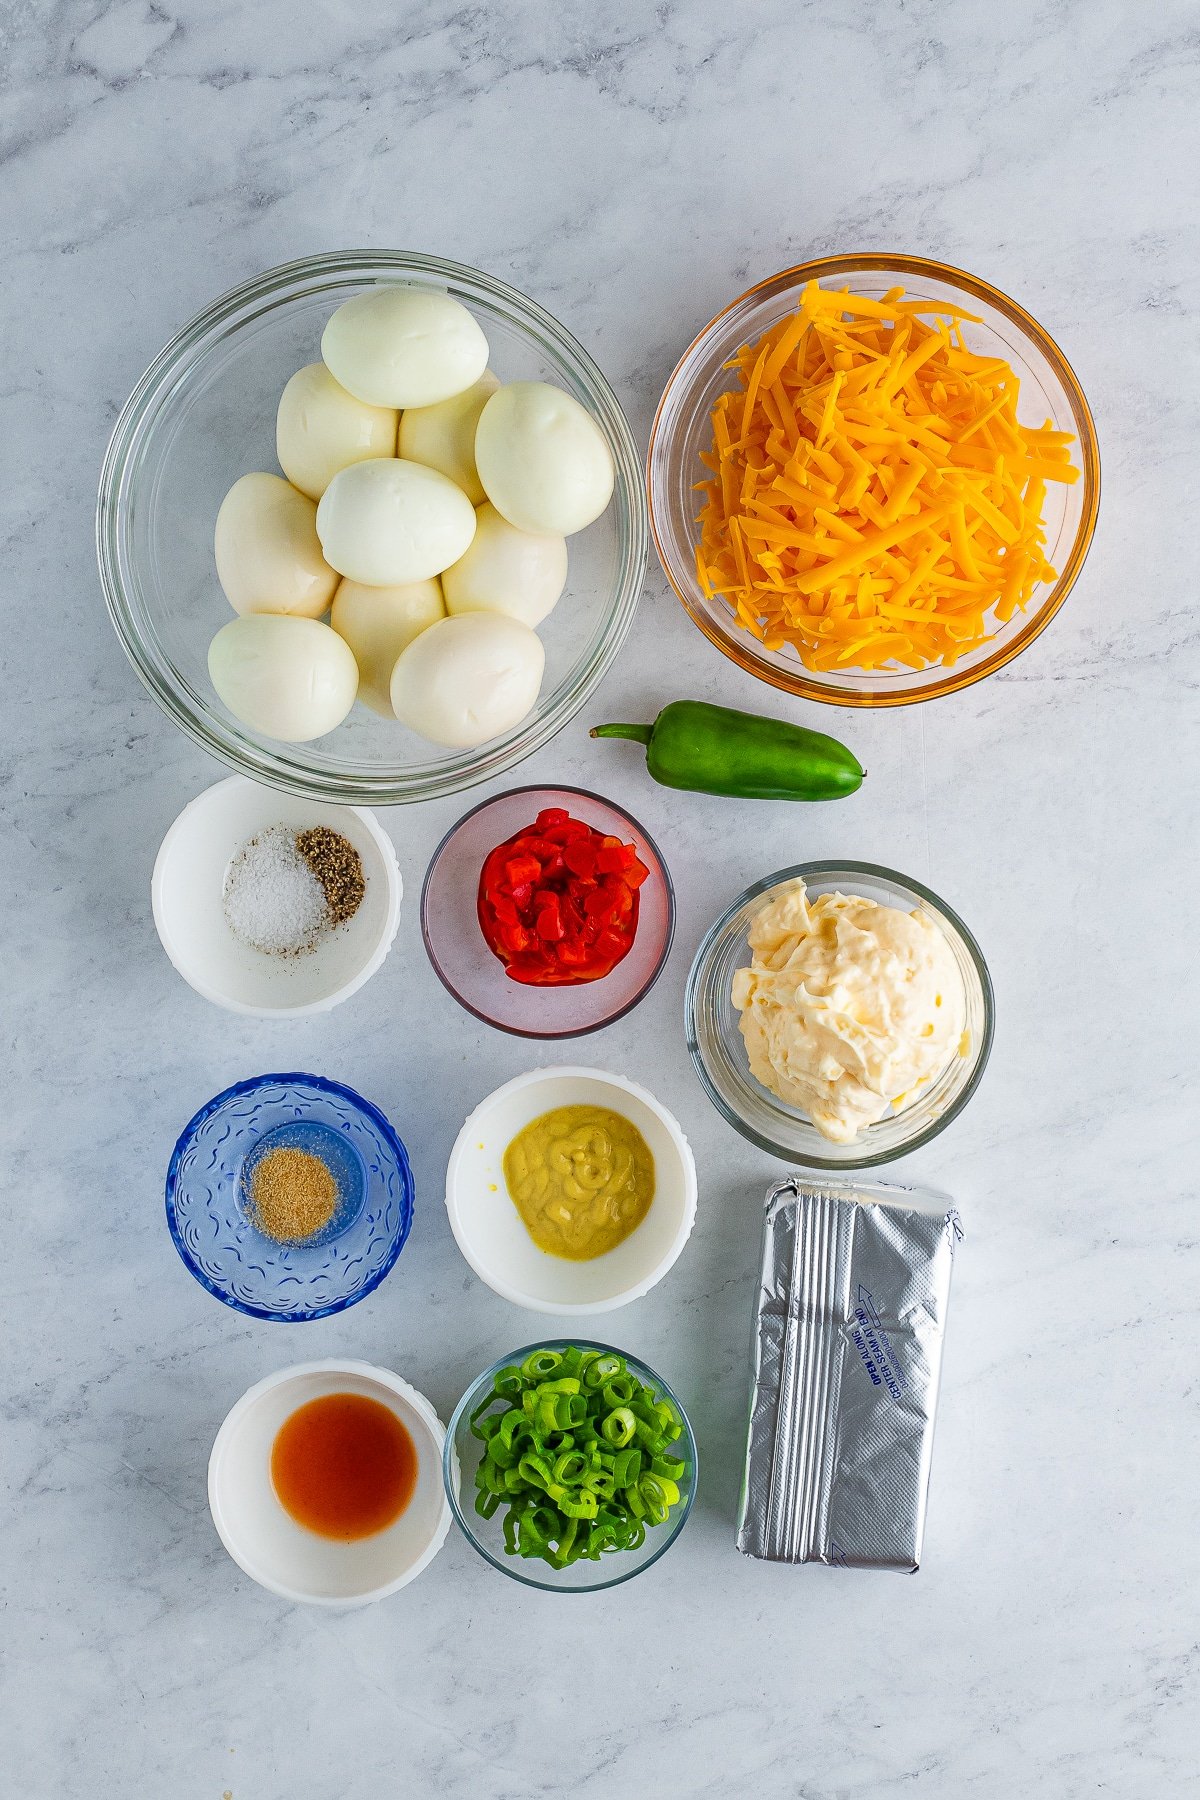 ingredients needed to make Egg Salad Sandwiches